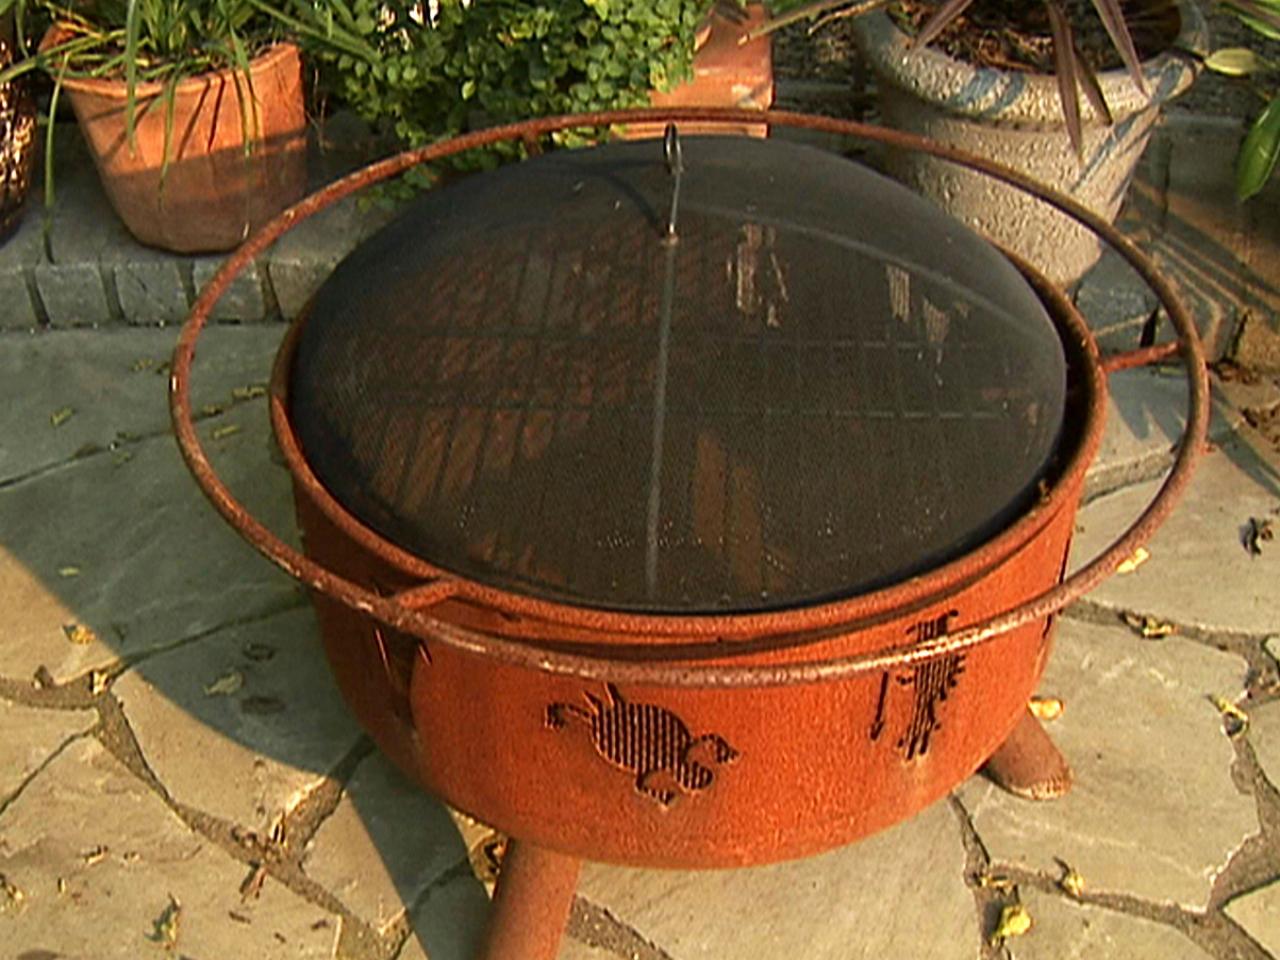 Outdoor Fire Pits And Pit Safety, American Fire Pit